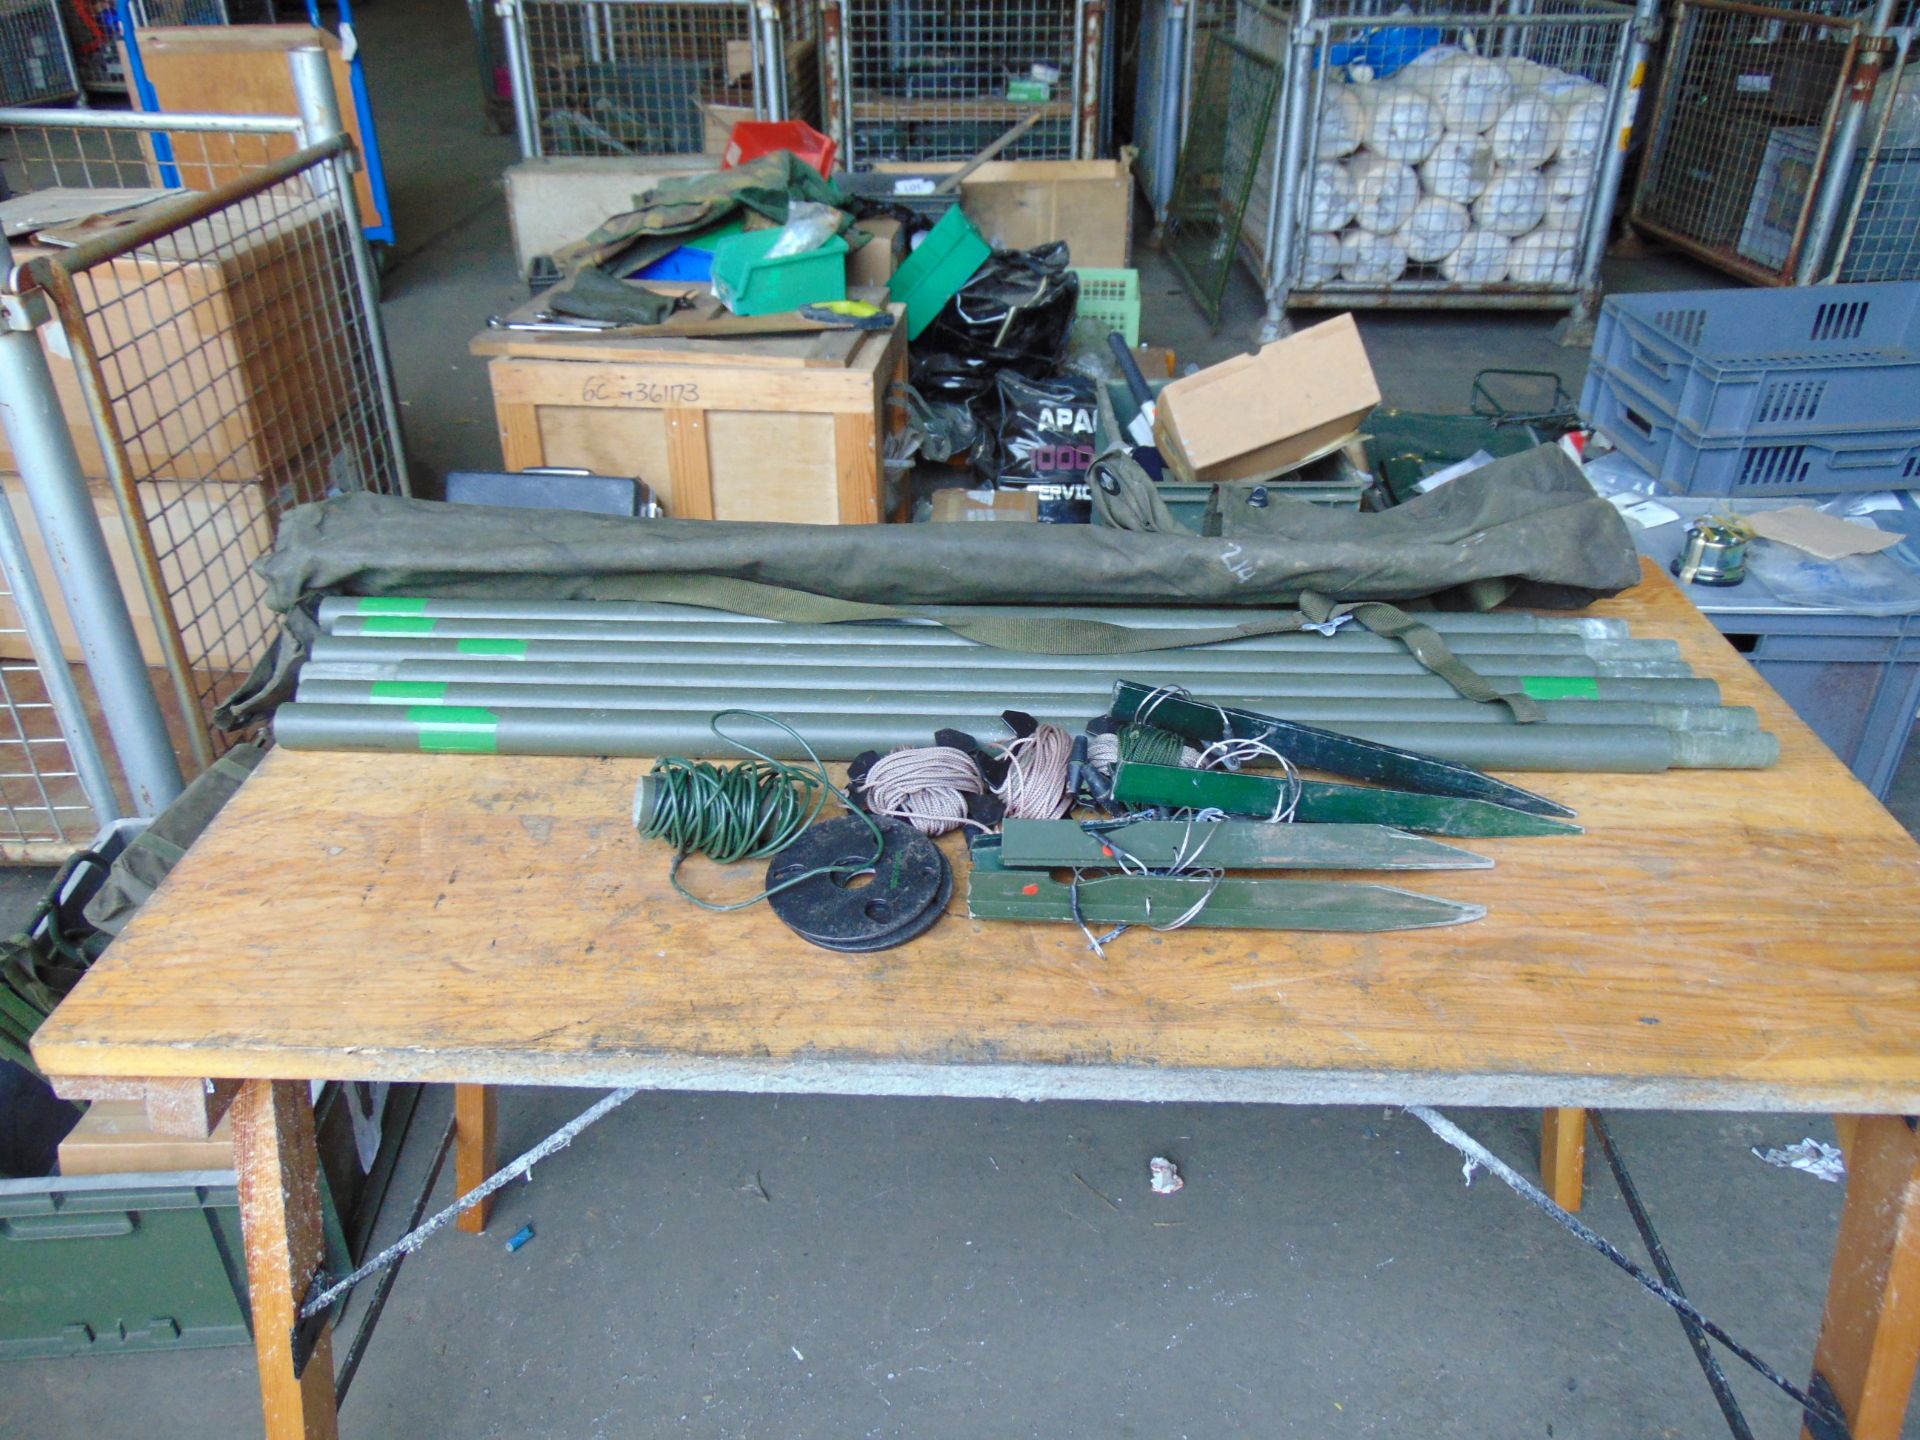 Clansman 6 Section Antenna Kit c/w Ropes, Pegs etc - Image 5 of 5